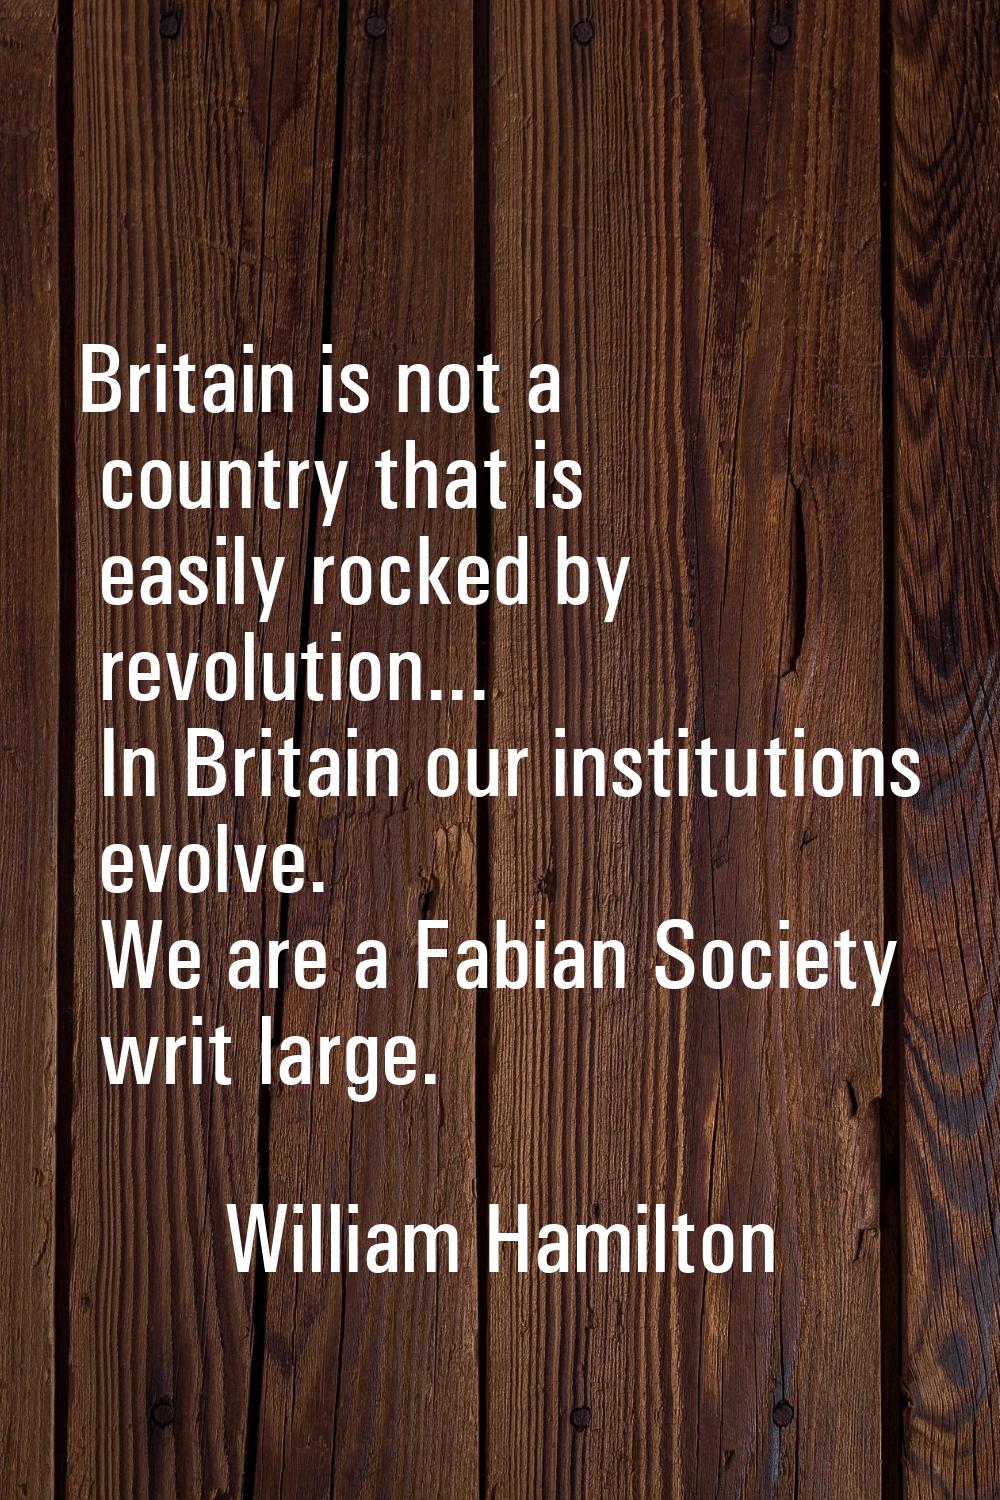 Britain is not a country that is easily rocked by revolution... In Britain our institutions evolve.